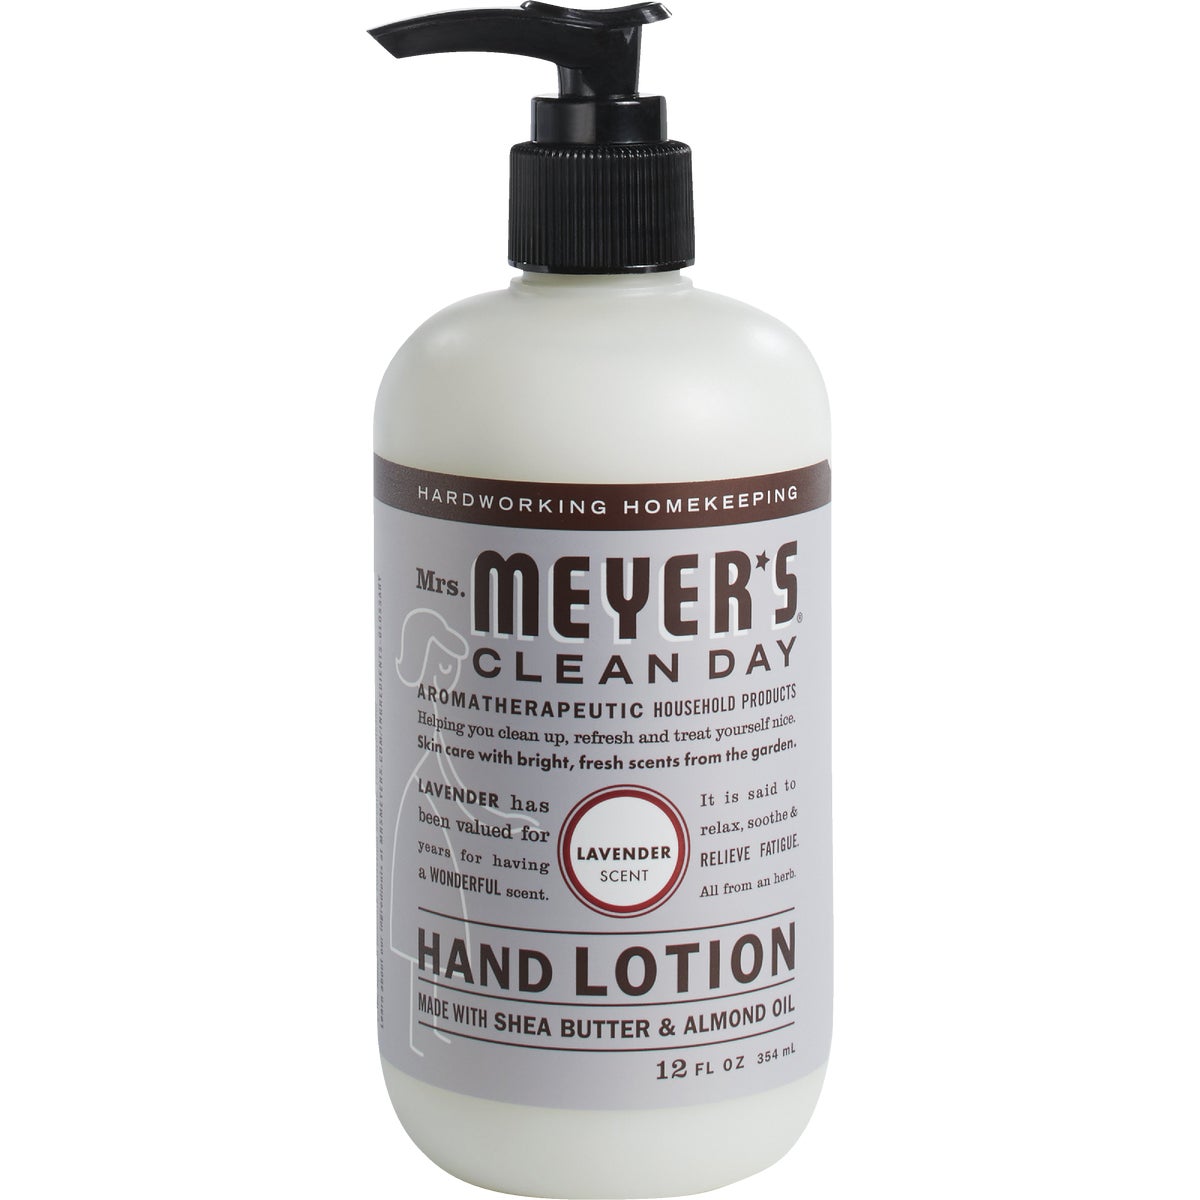 Mrs. Meyer's Clean Day 12 Oz. Lavender Hand Lotion